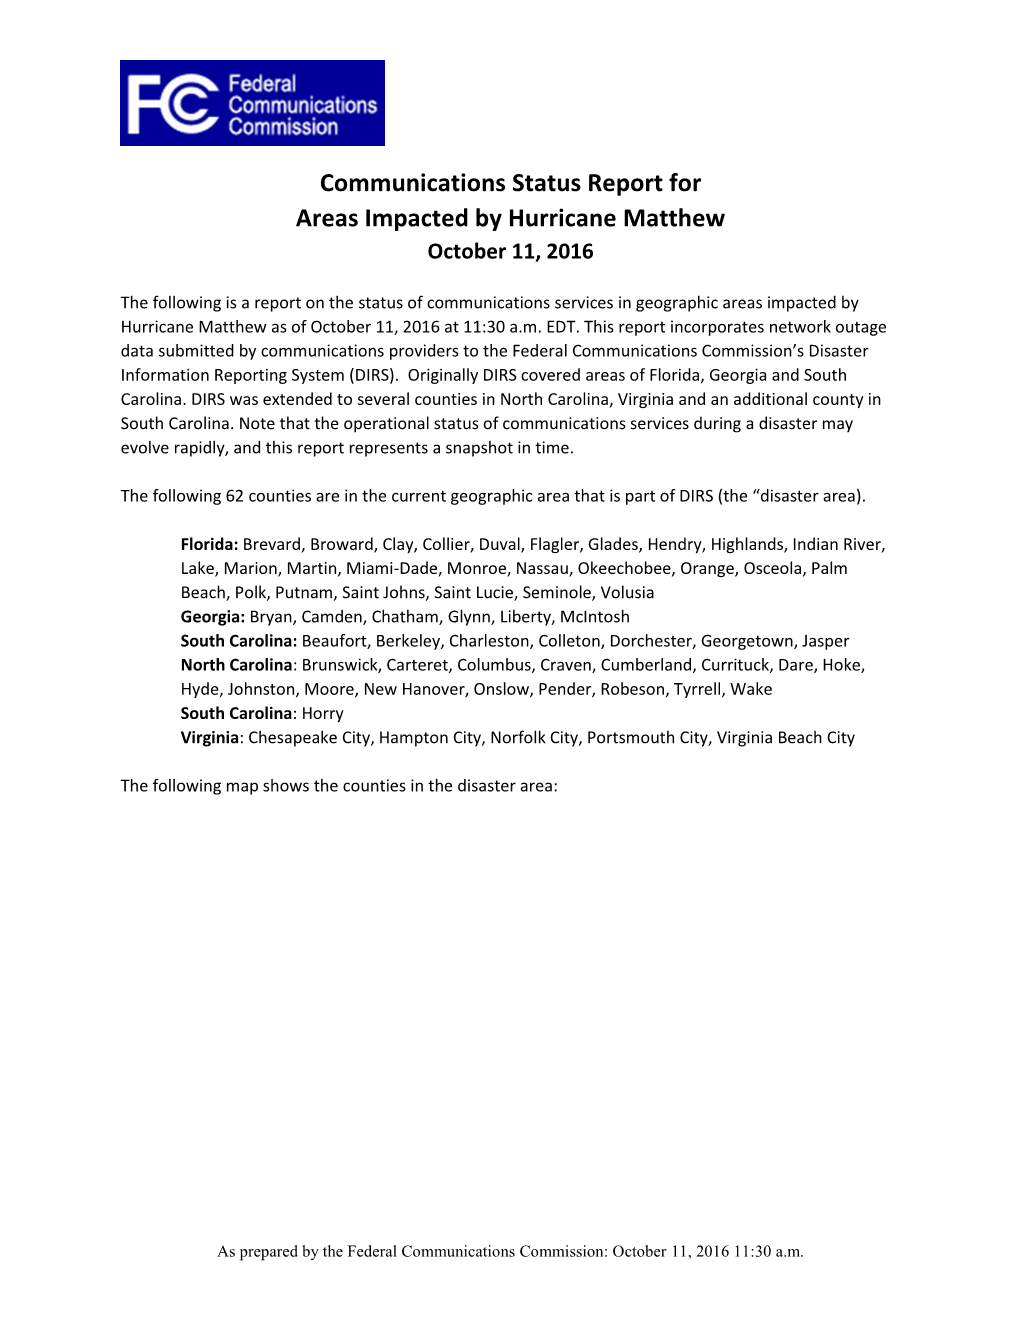 Communications Status Report for Areas Impacted by Hurricane Matthew October 11, 2016